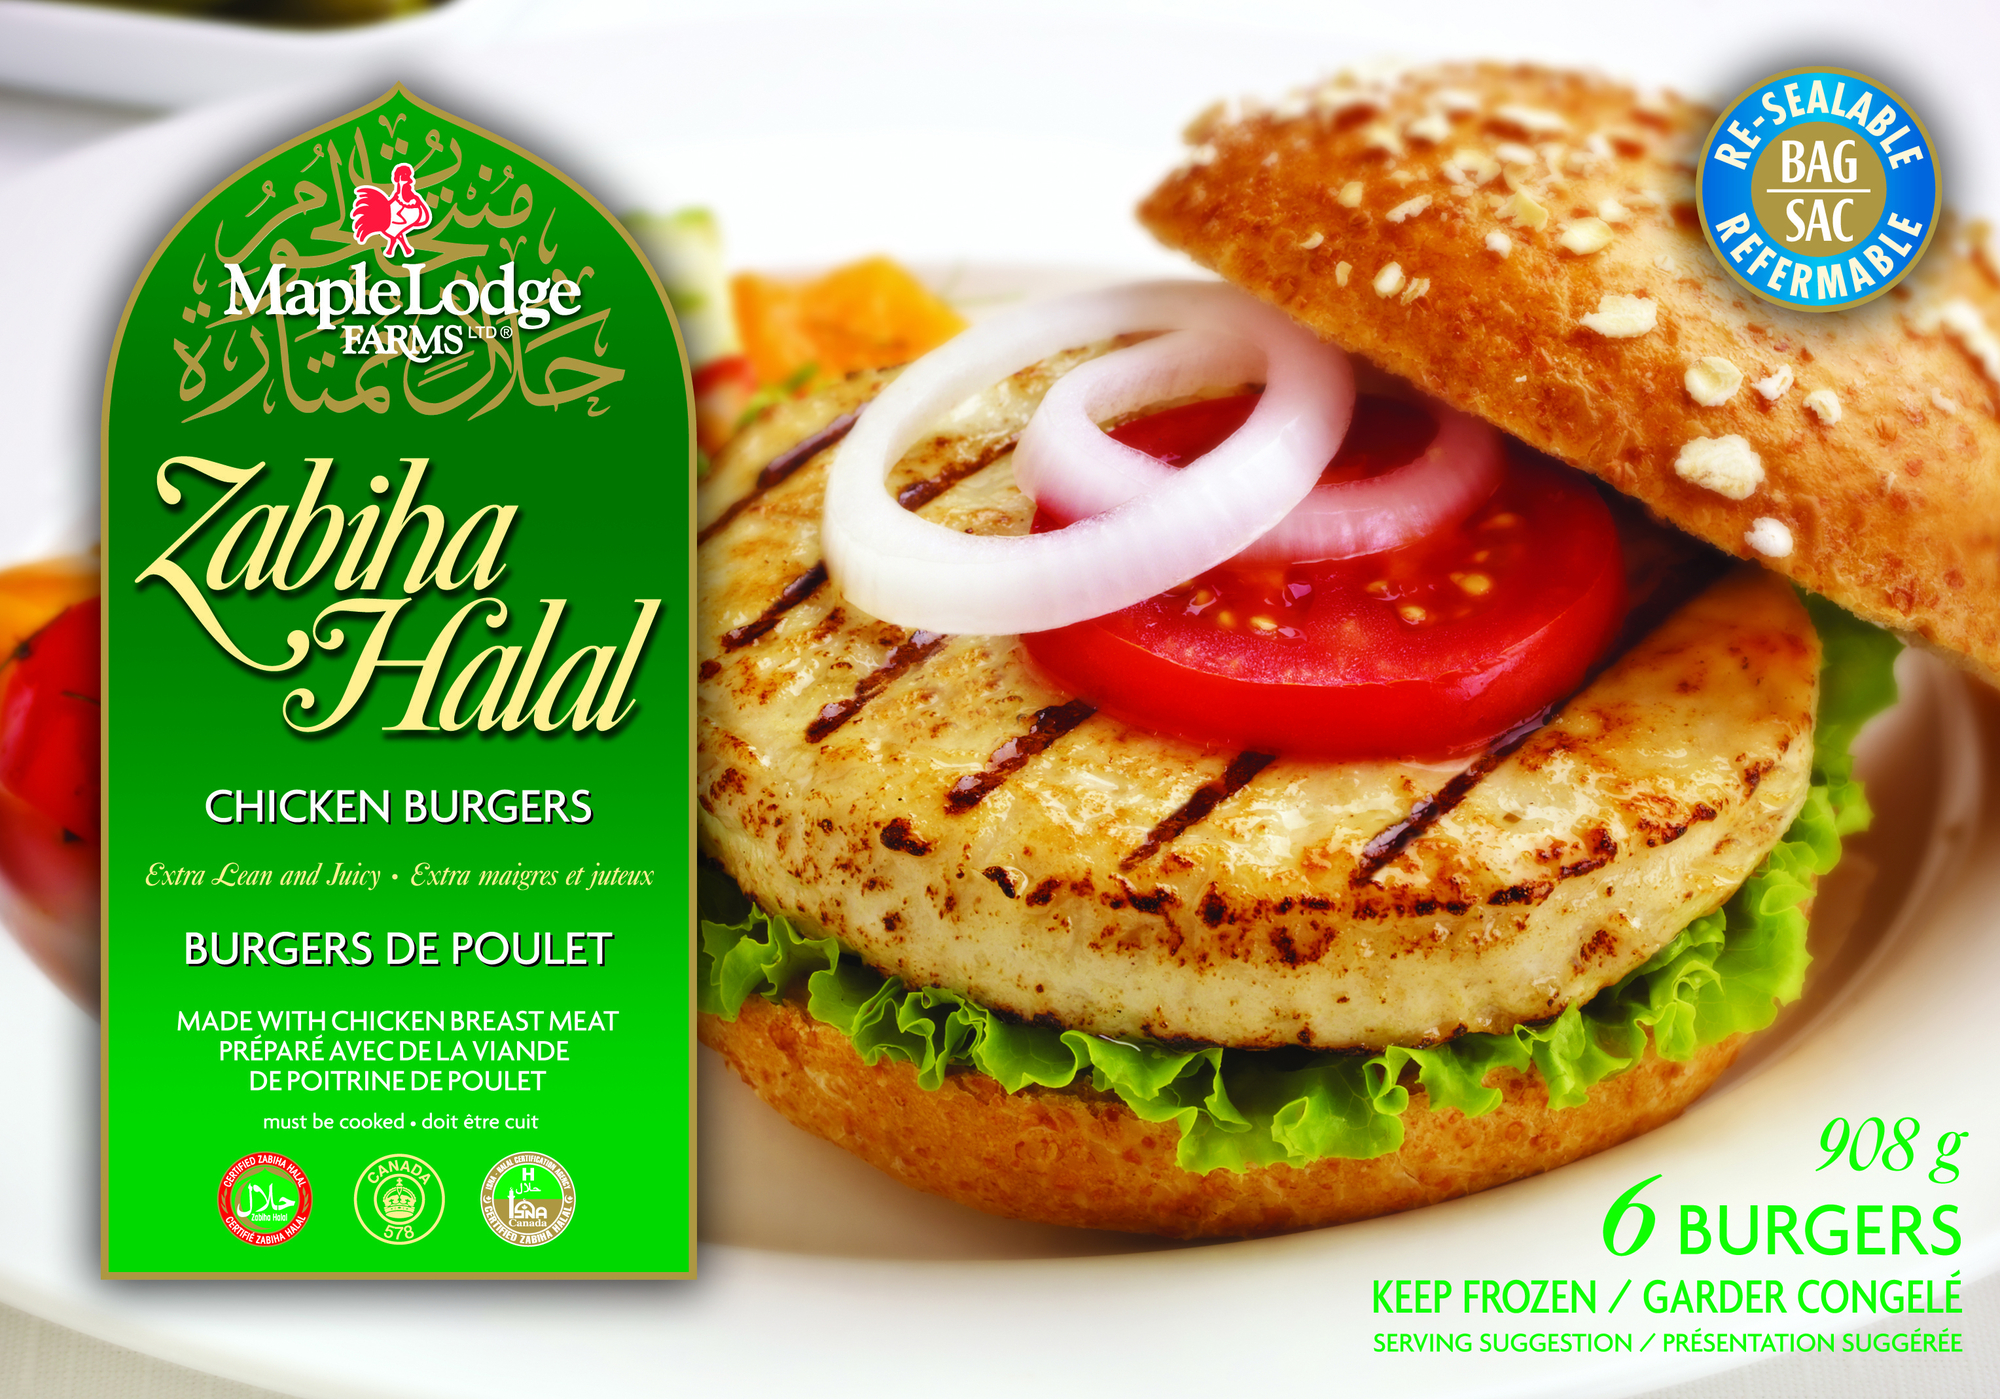 Maple Lodge Farm's "Zabiha Halal" products hit stores with new look